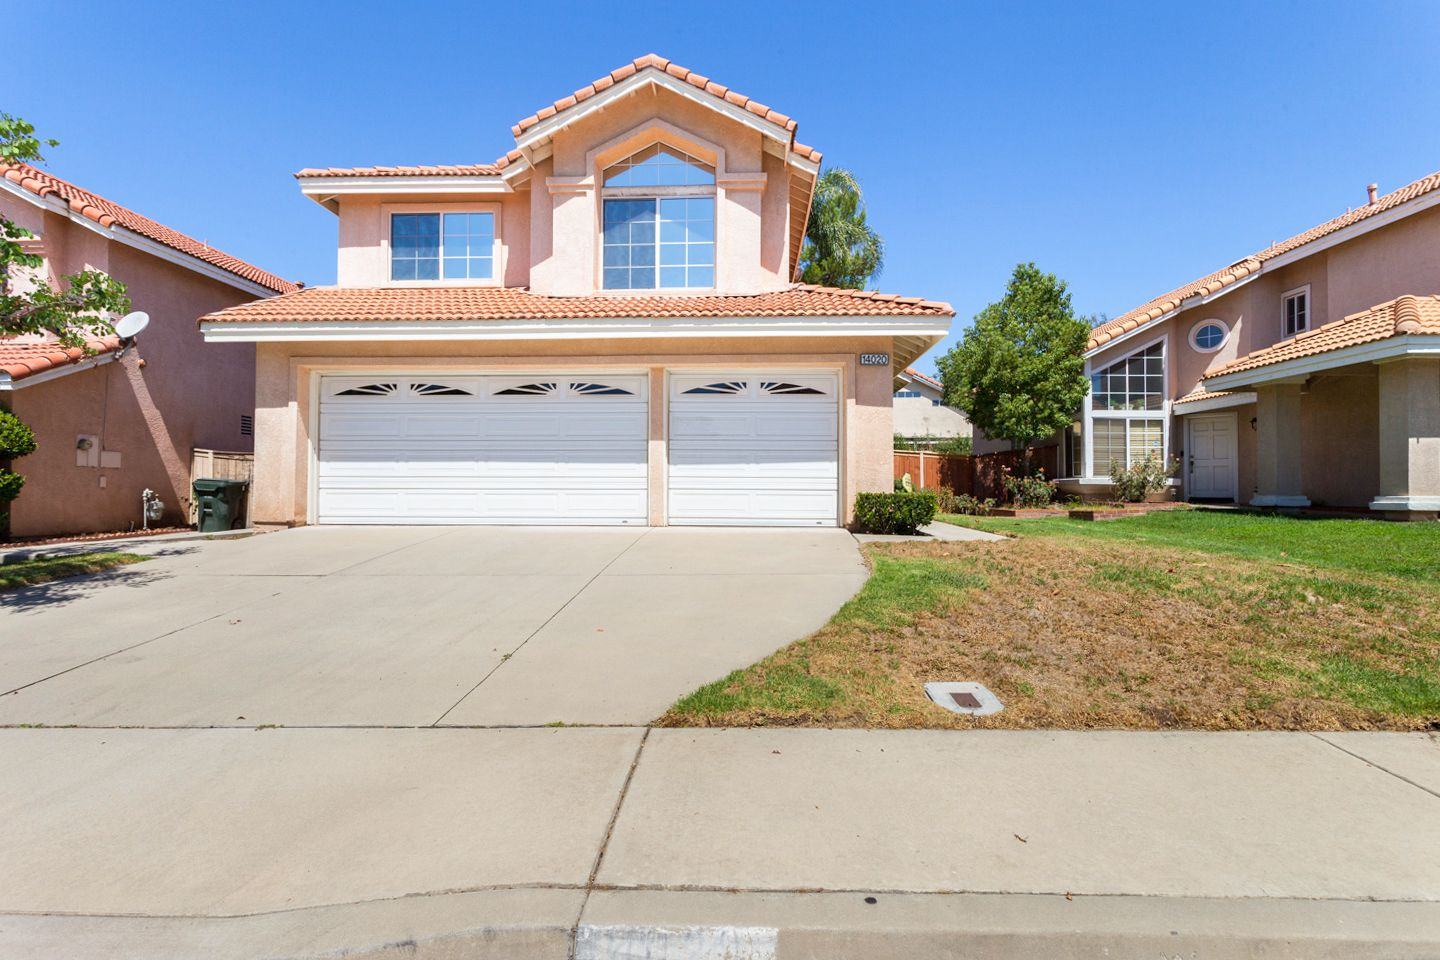 14020 Valley Forge Ct Fontana Ca 92336 4 Bed 3 Bath Single Family Home Mls Iv19209578 23 Photos Trulia for dimensions 1440 X 960